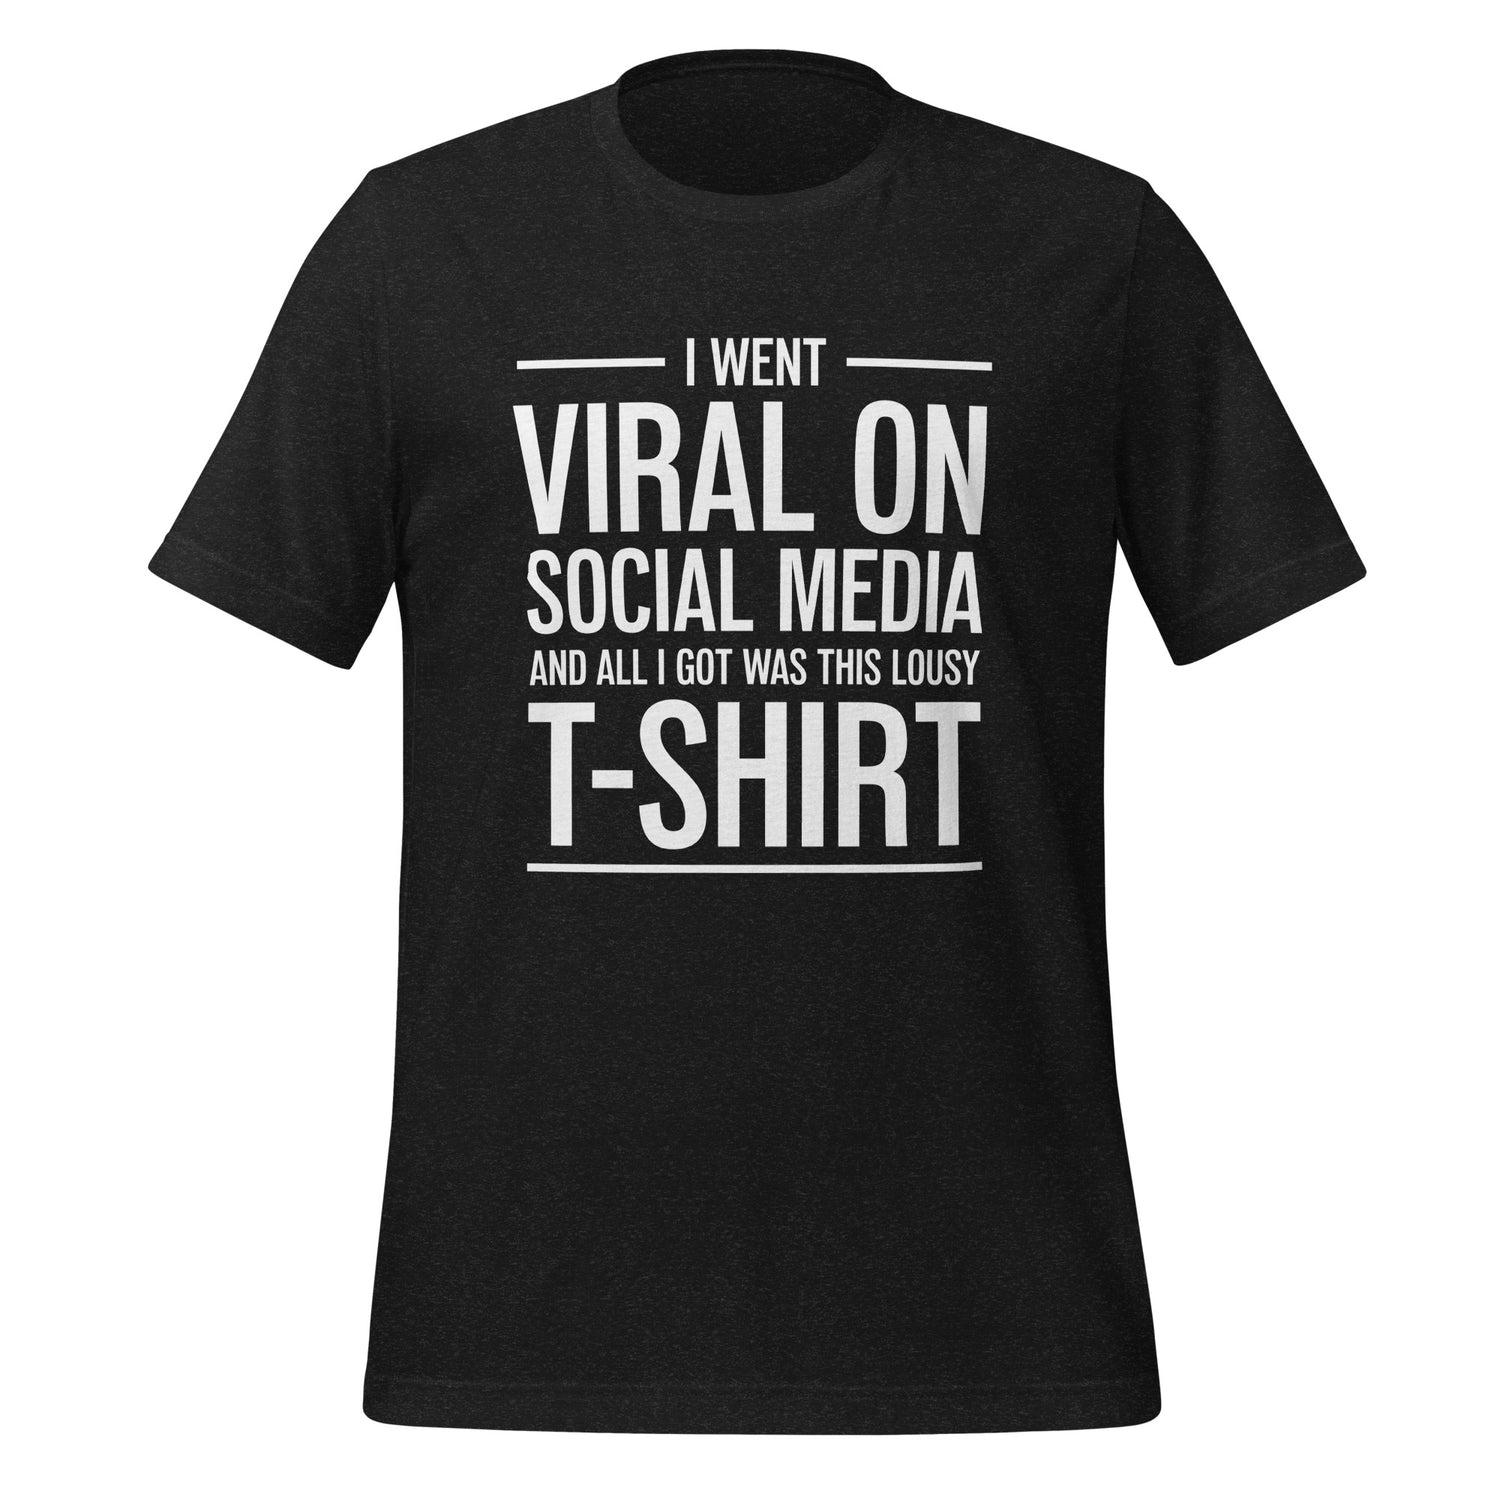 A shirt that reads, "I went viral on social media and all I got was this lousy t-shirt."